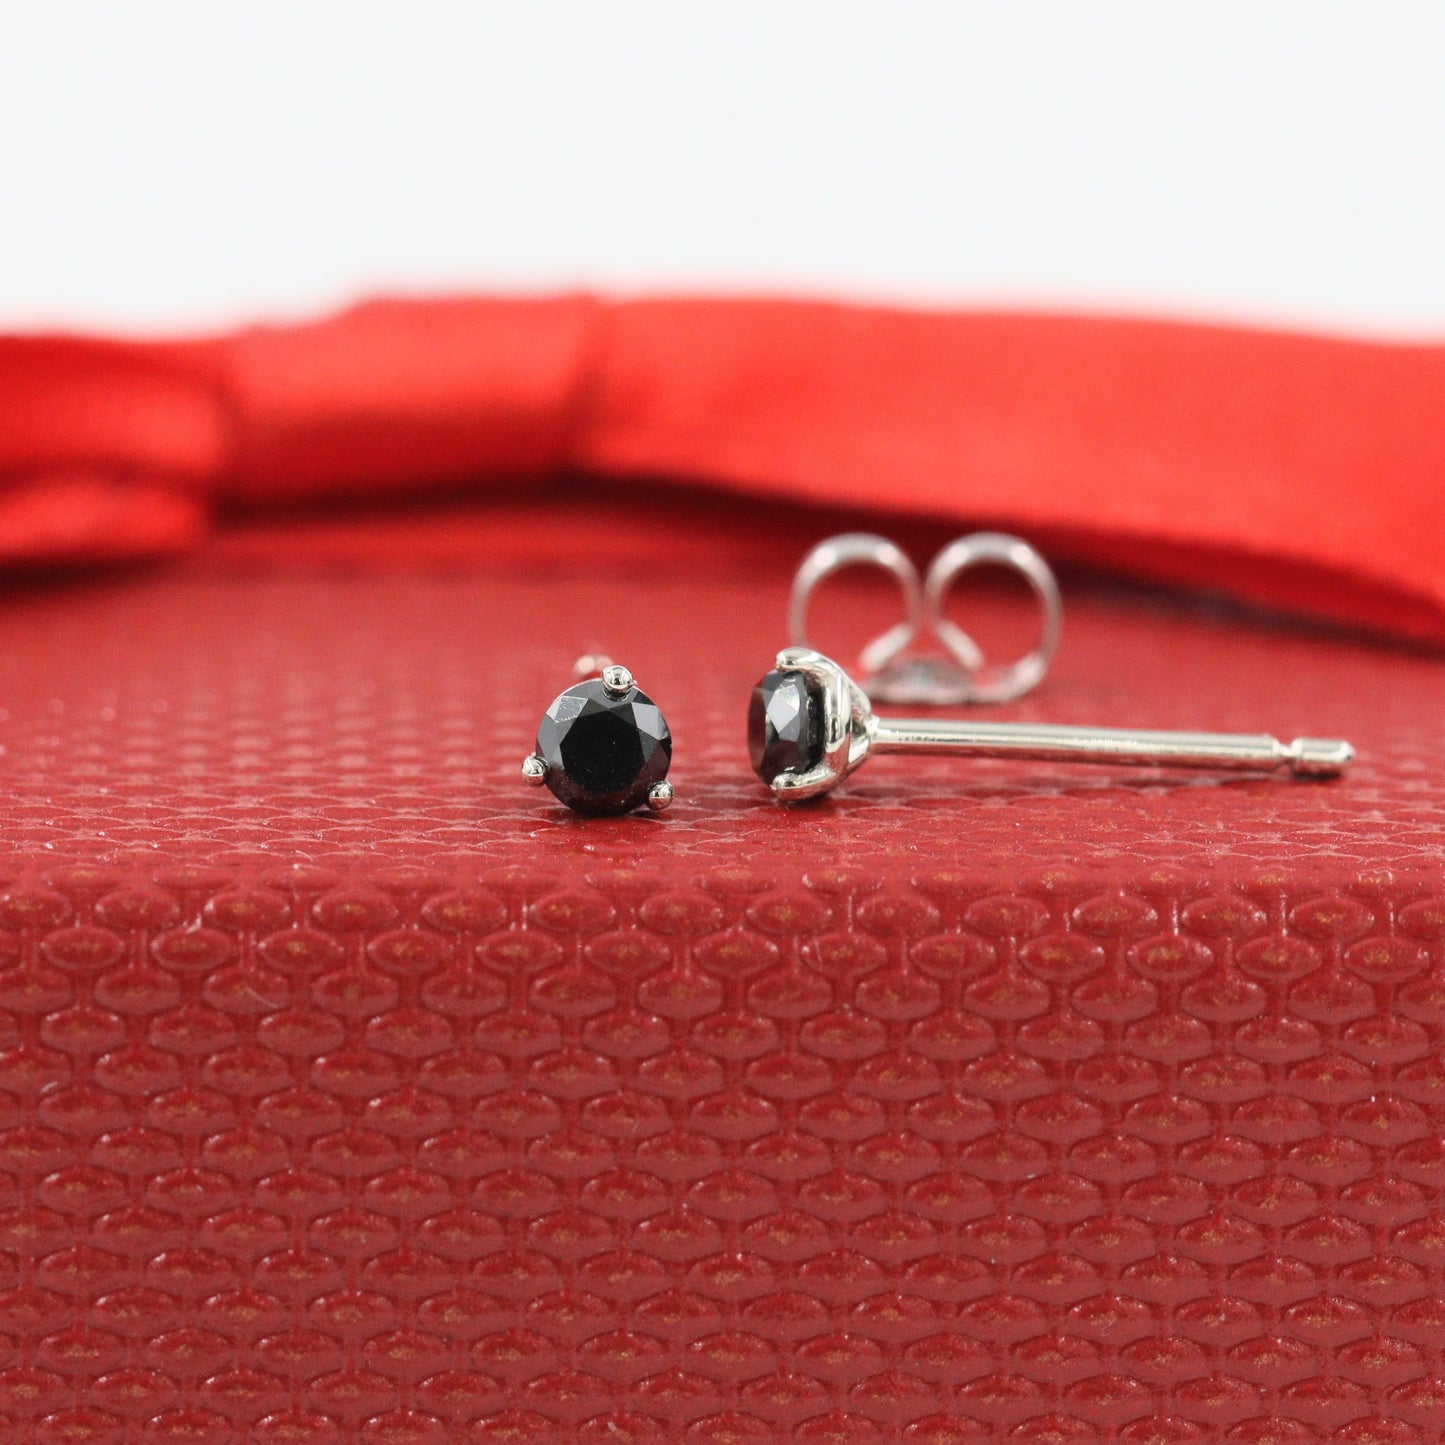 Solitaire Black Diamond Earring/Three Prong Set Black Diamond Earring/14K gold Solitaire Stud Earring/Dainty Simple Earring/Anniversary gift